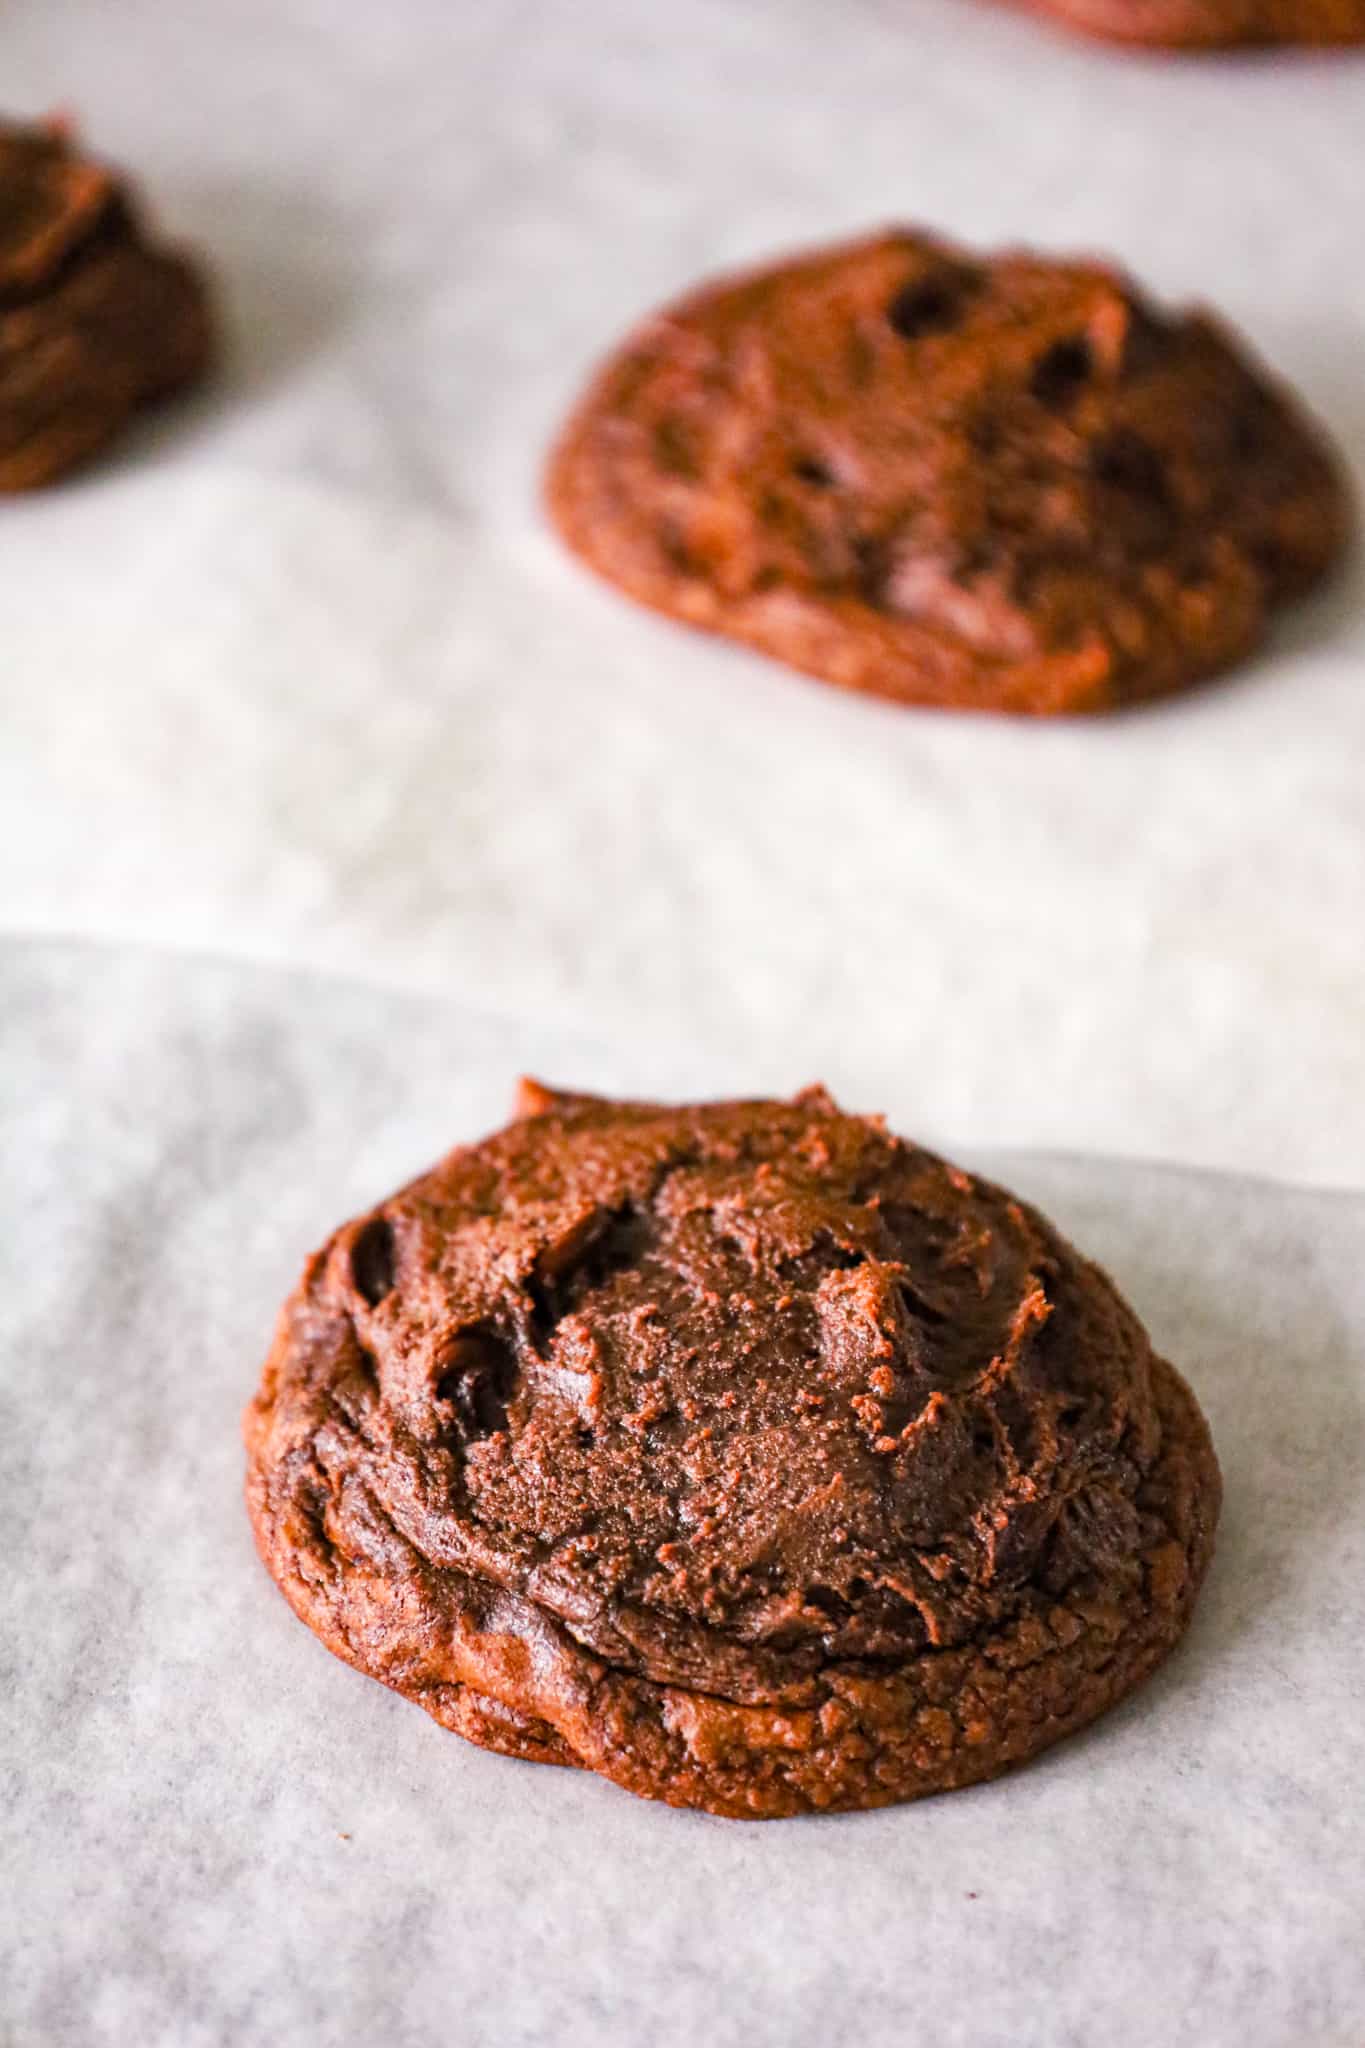 Brownie Mix Cookies are an easy chocolate cookie recipe using boxed brownie mix and loaded with chocolate chips.